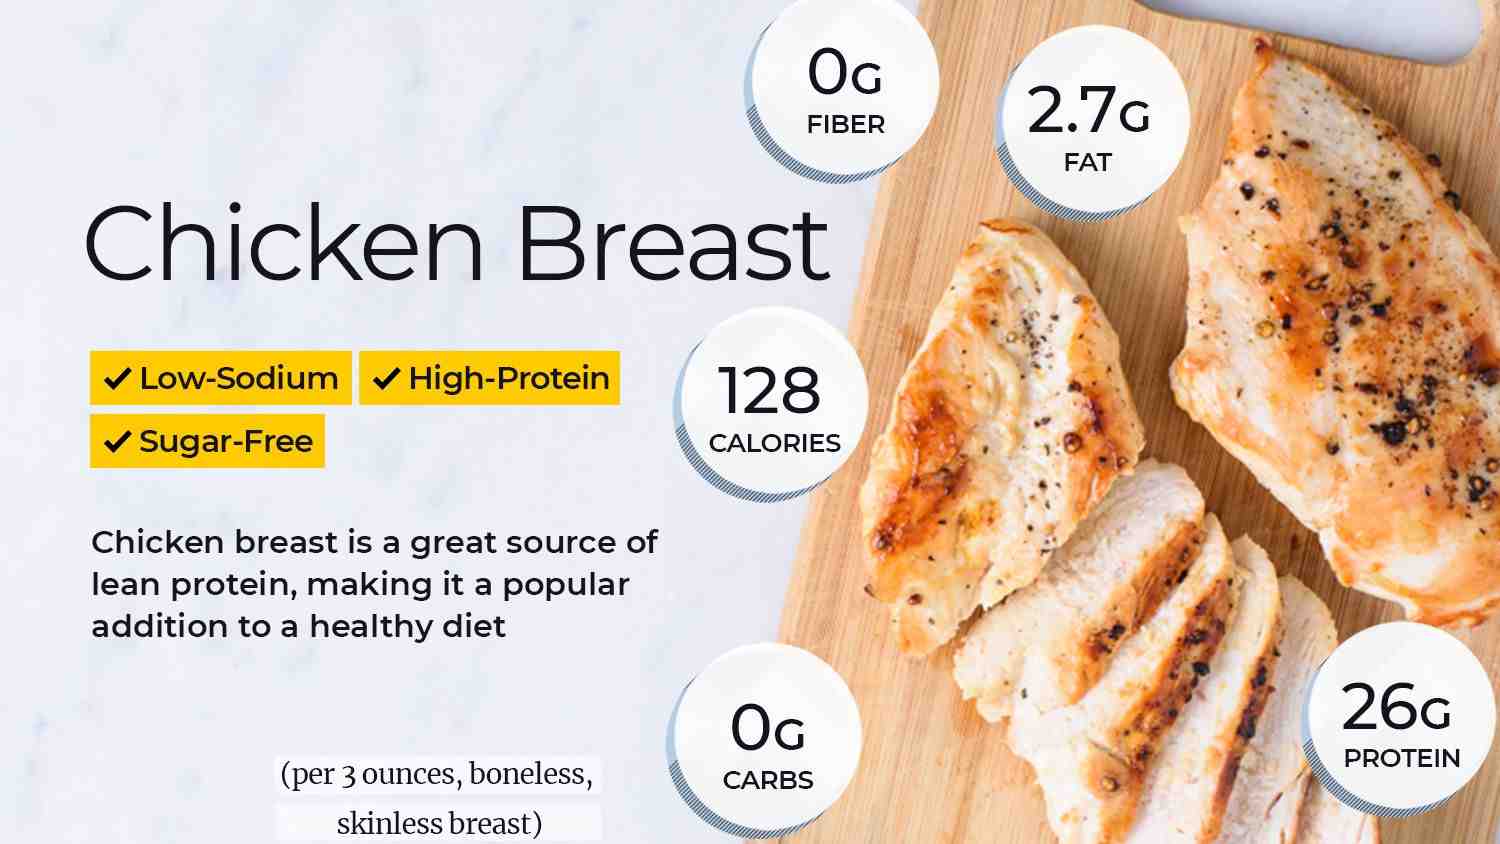 Is eating chicken breast daily good?